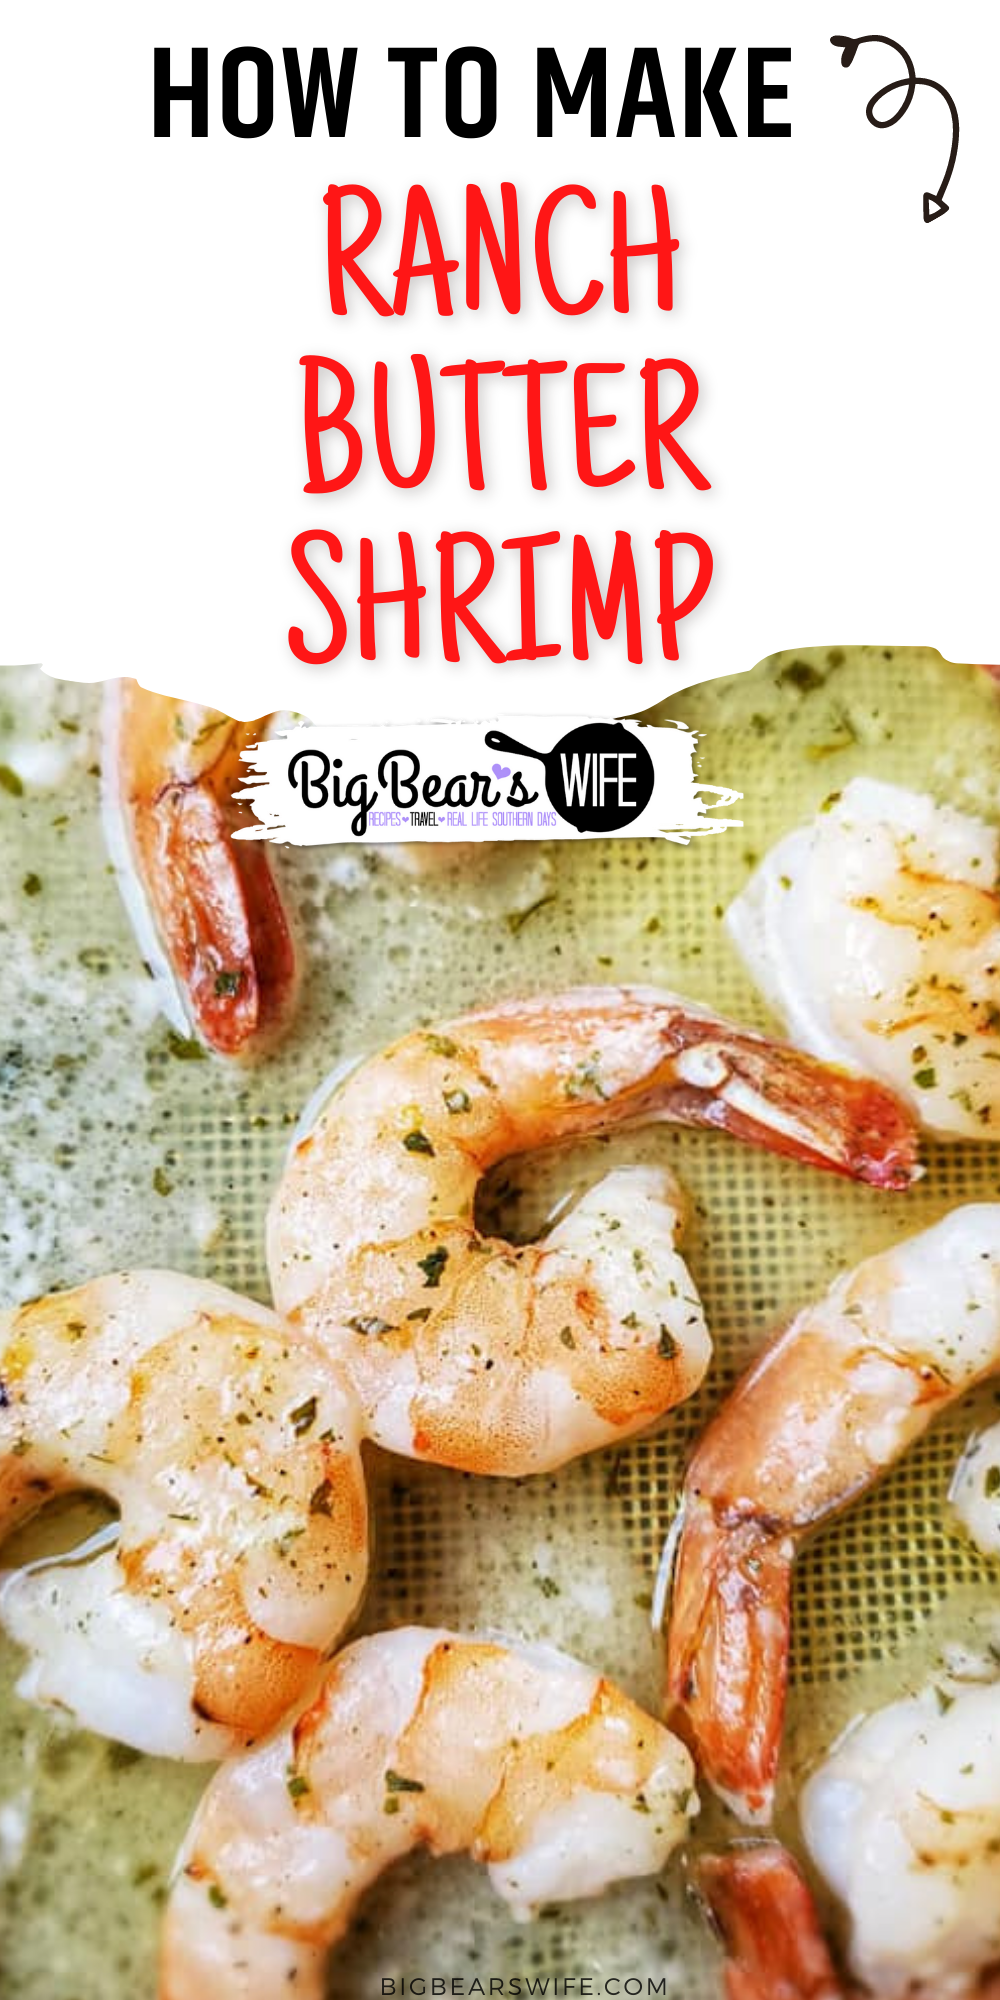 Ranch Butter Shrimp is a super quick dish that takes less than 15 minutes to make with only 3 ingredients! You're going to go crazy over how easy this shrimp recipe is!  via @bigbearswife